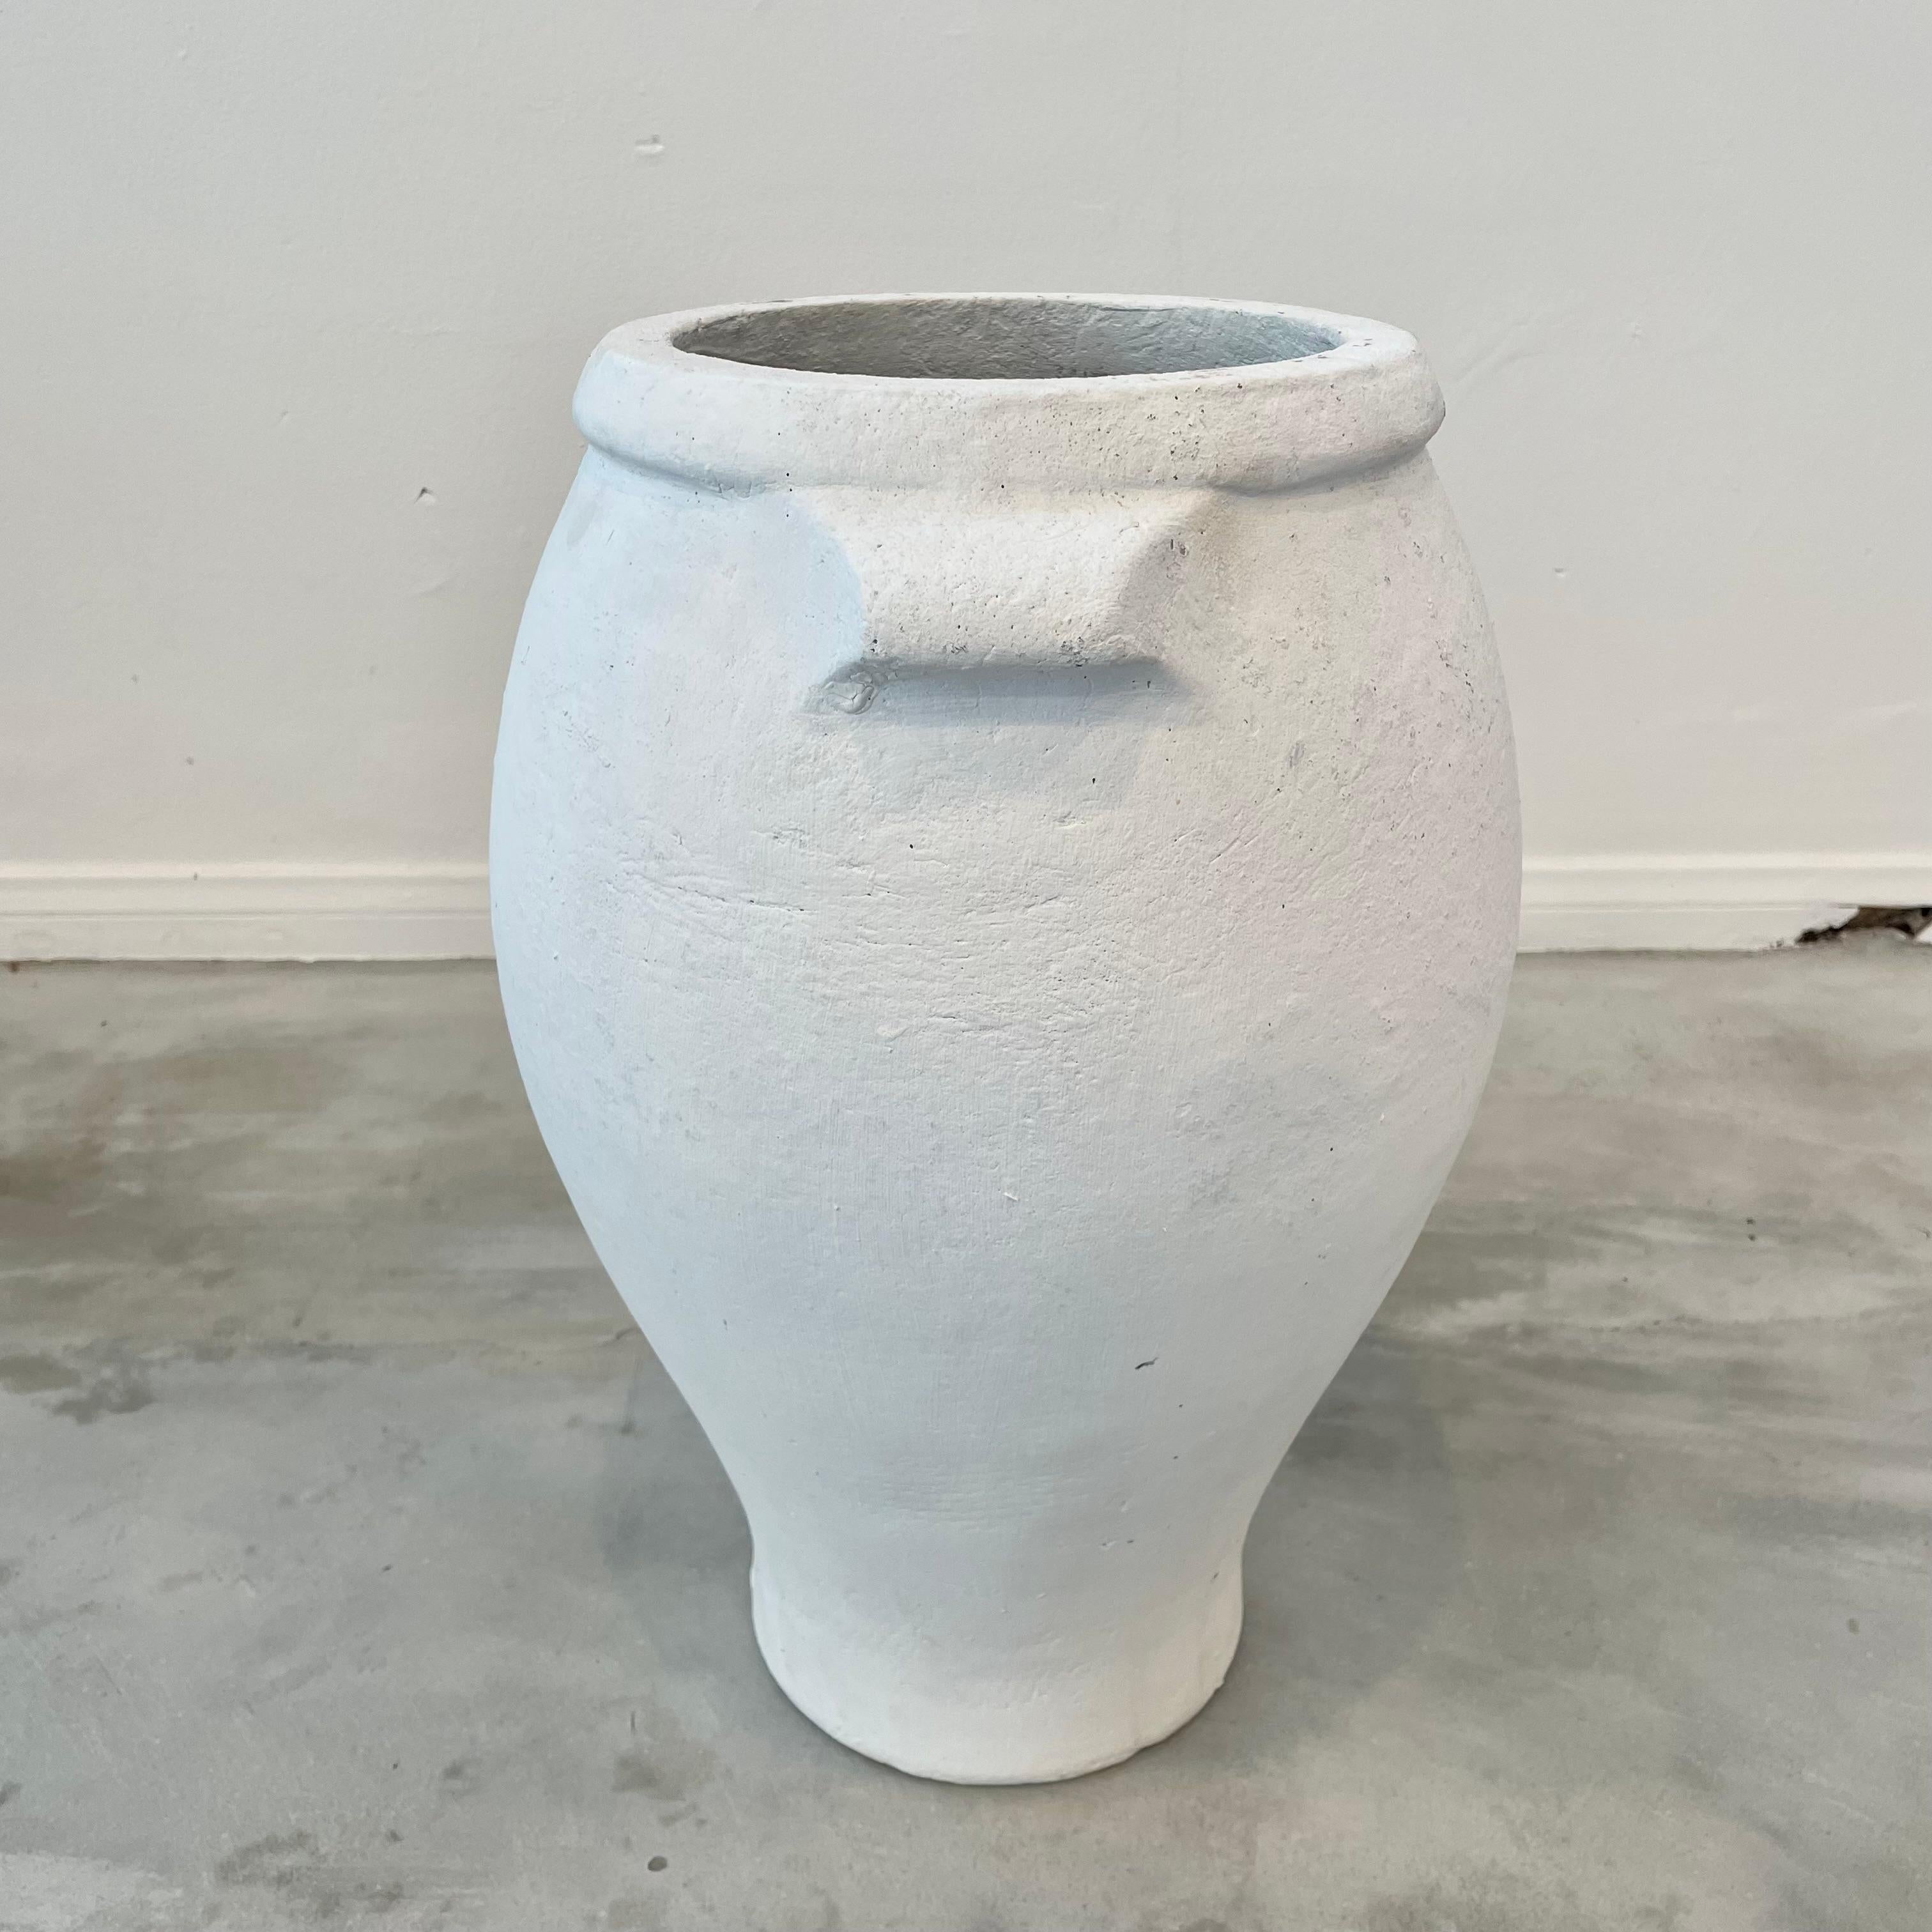 Willy Guhl Concrete Urn with Handles, 1960s Switzerland For Sale 4